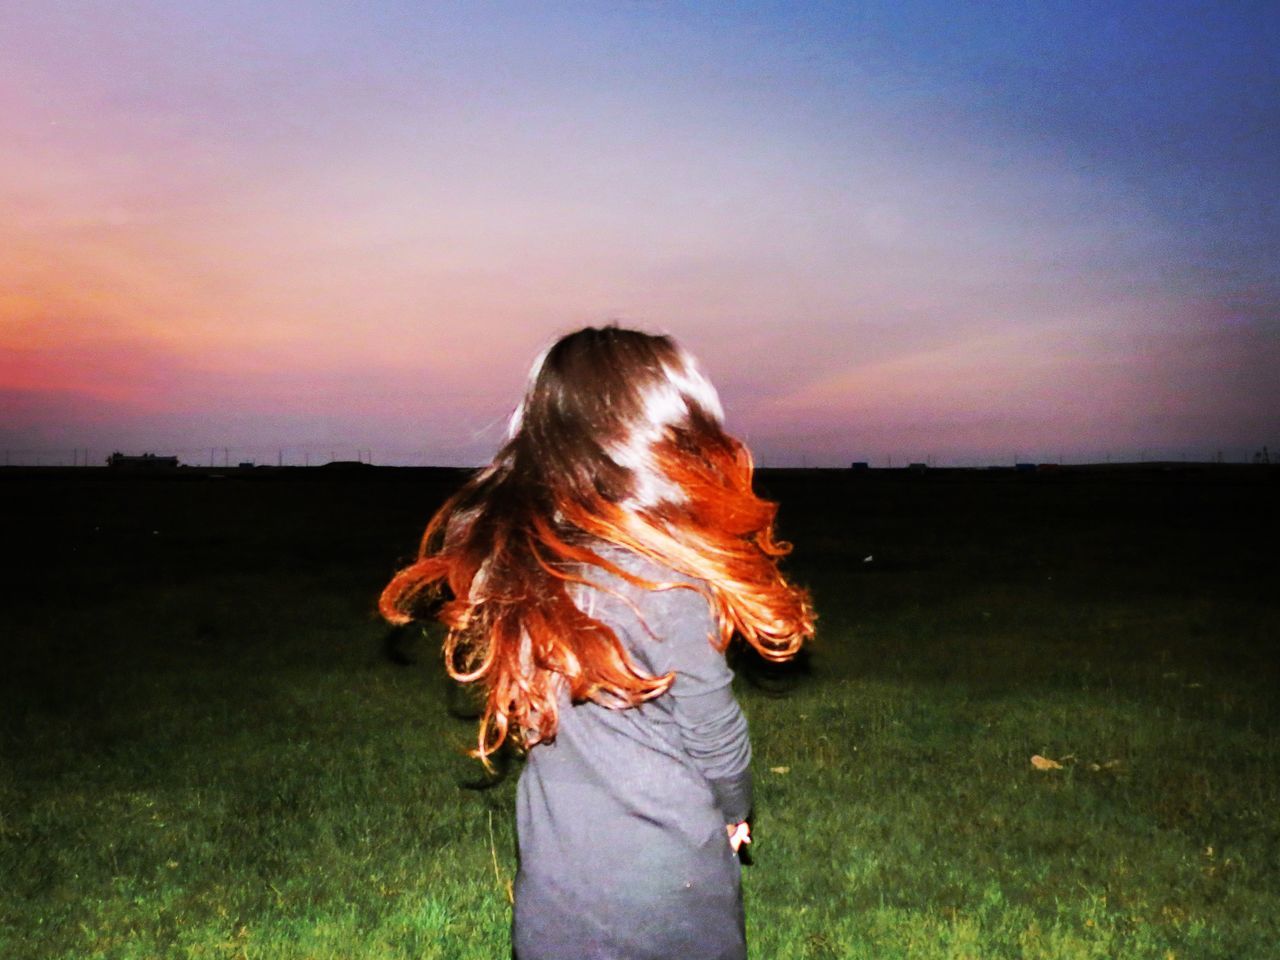 field, sky, hairstyle, land, hair, sunset, real people, one person, grass, long hair, women, environment, three quarter length, nature, landscape, plant, standing, lifestyles, leisure activity, outdoors, tousled hair, hair toss, human hair